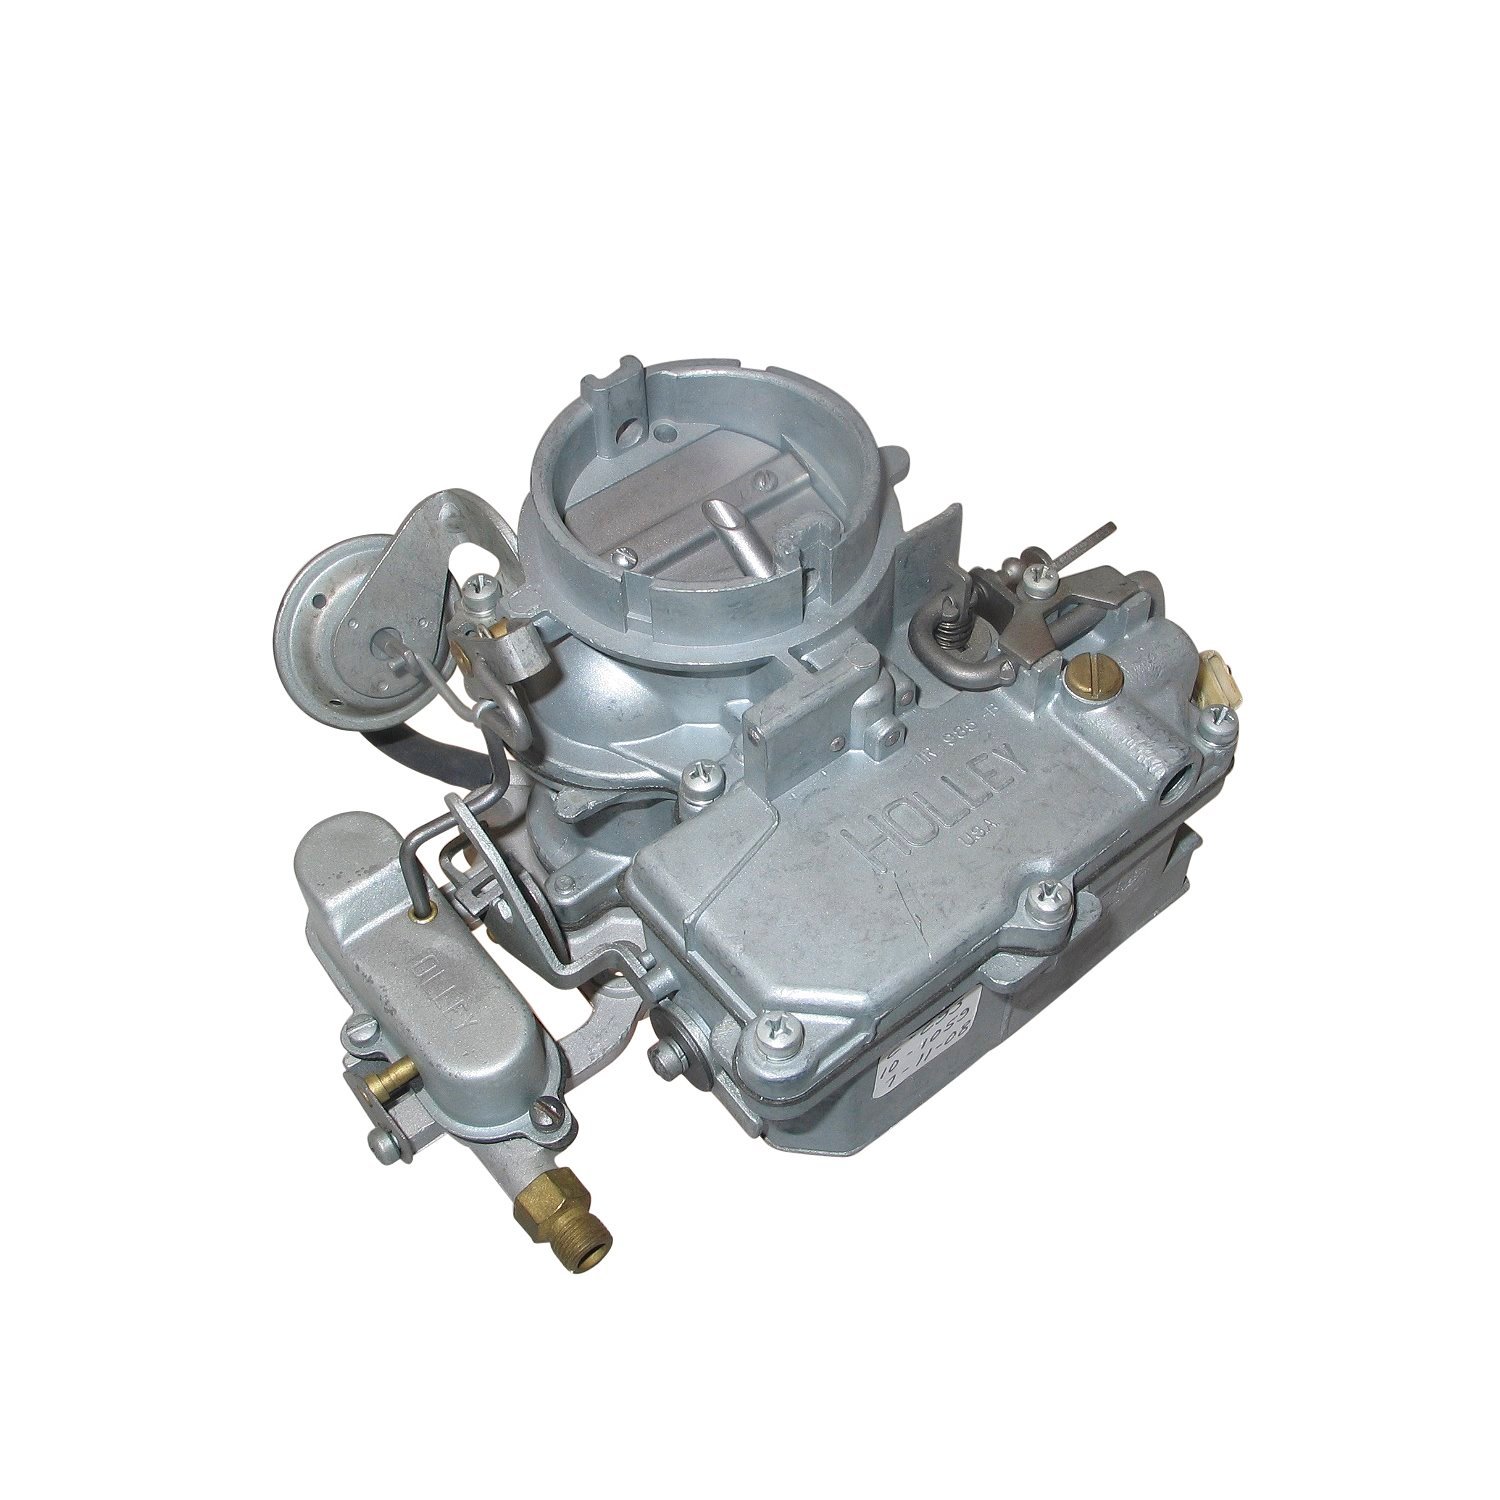 10-1059 Rochester Remanufactured Carburetor, 2209-Style